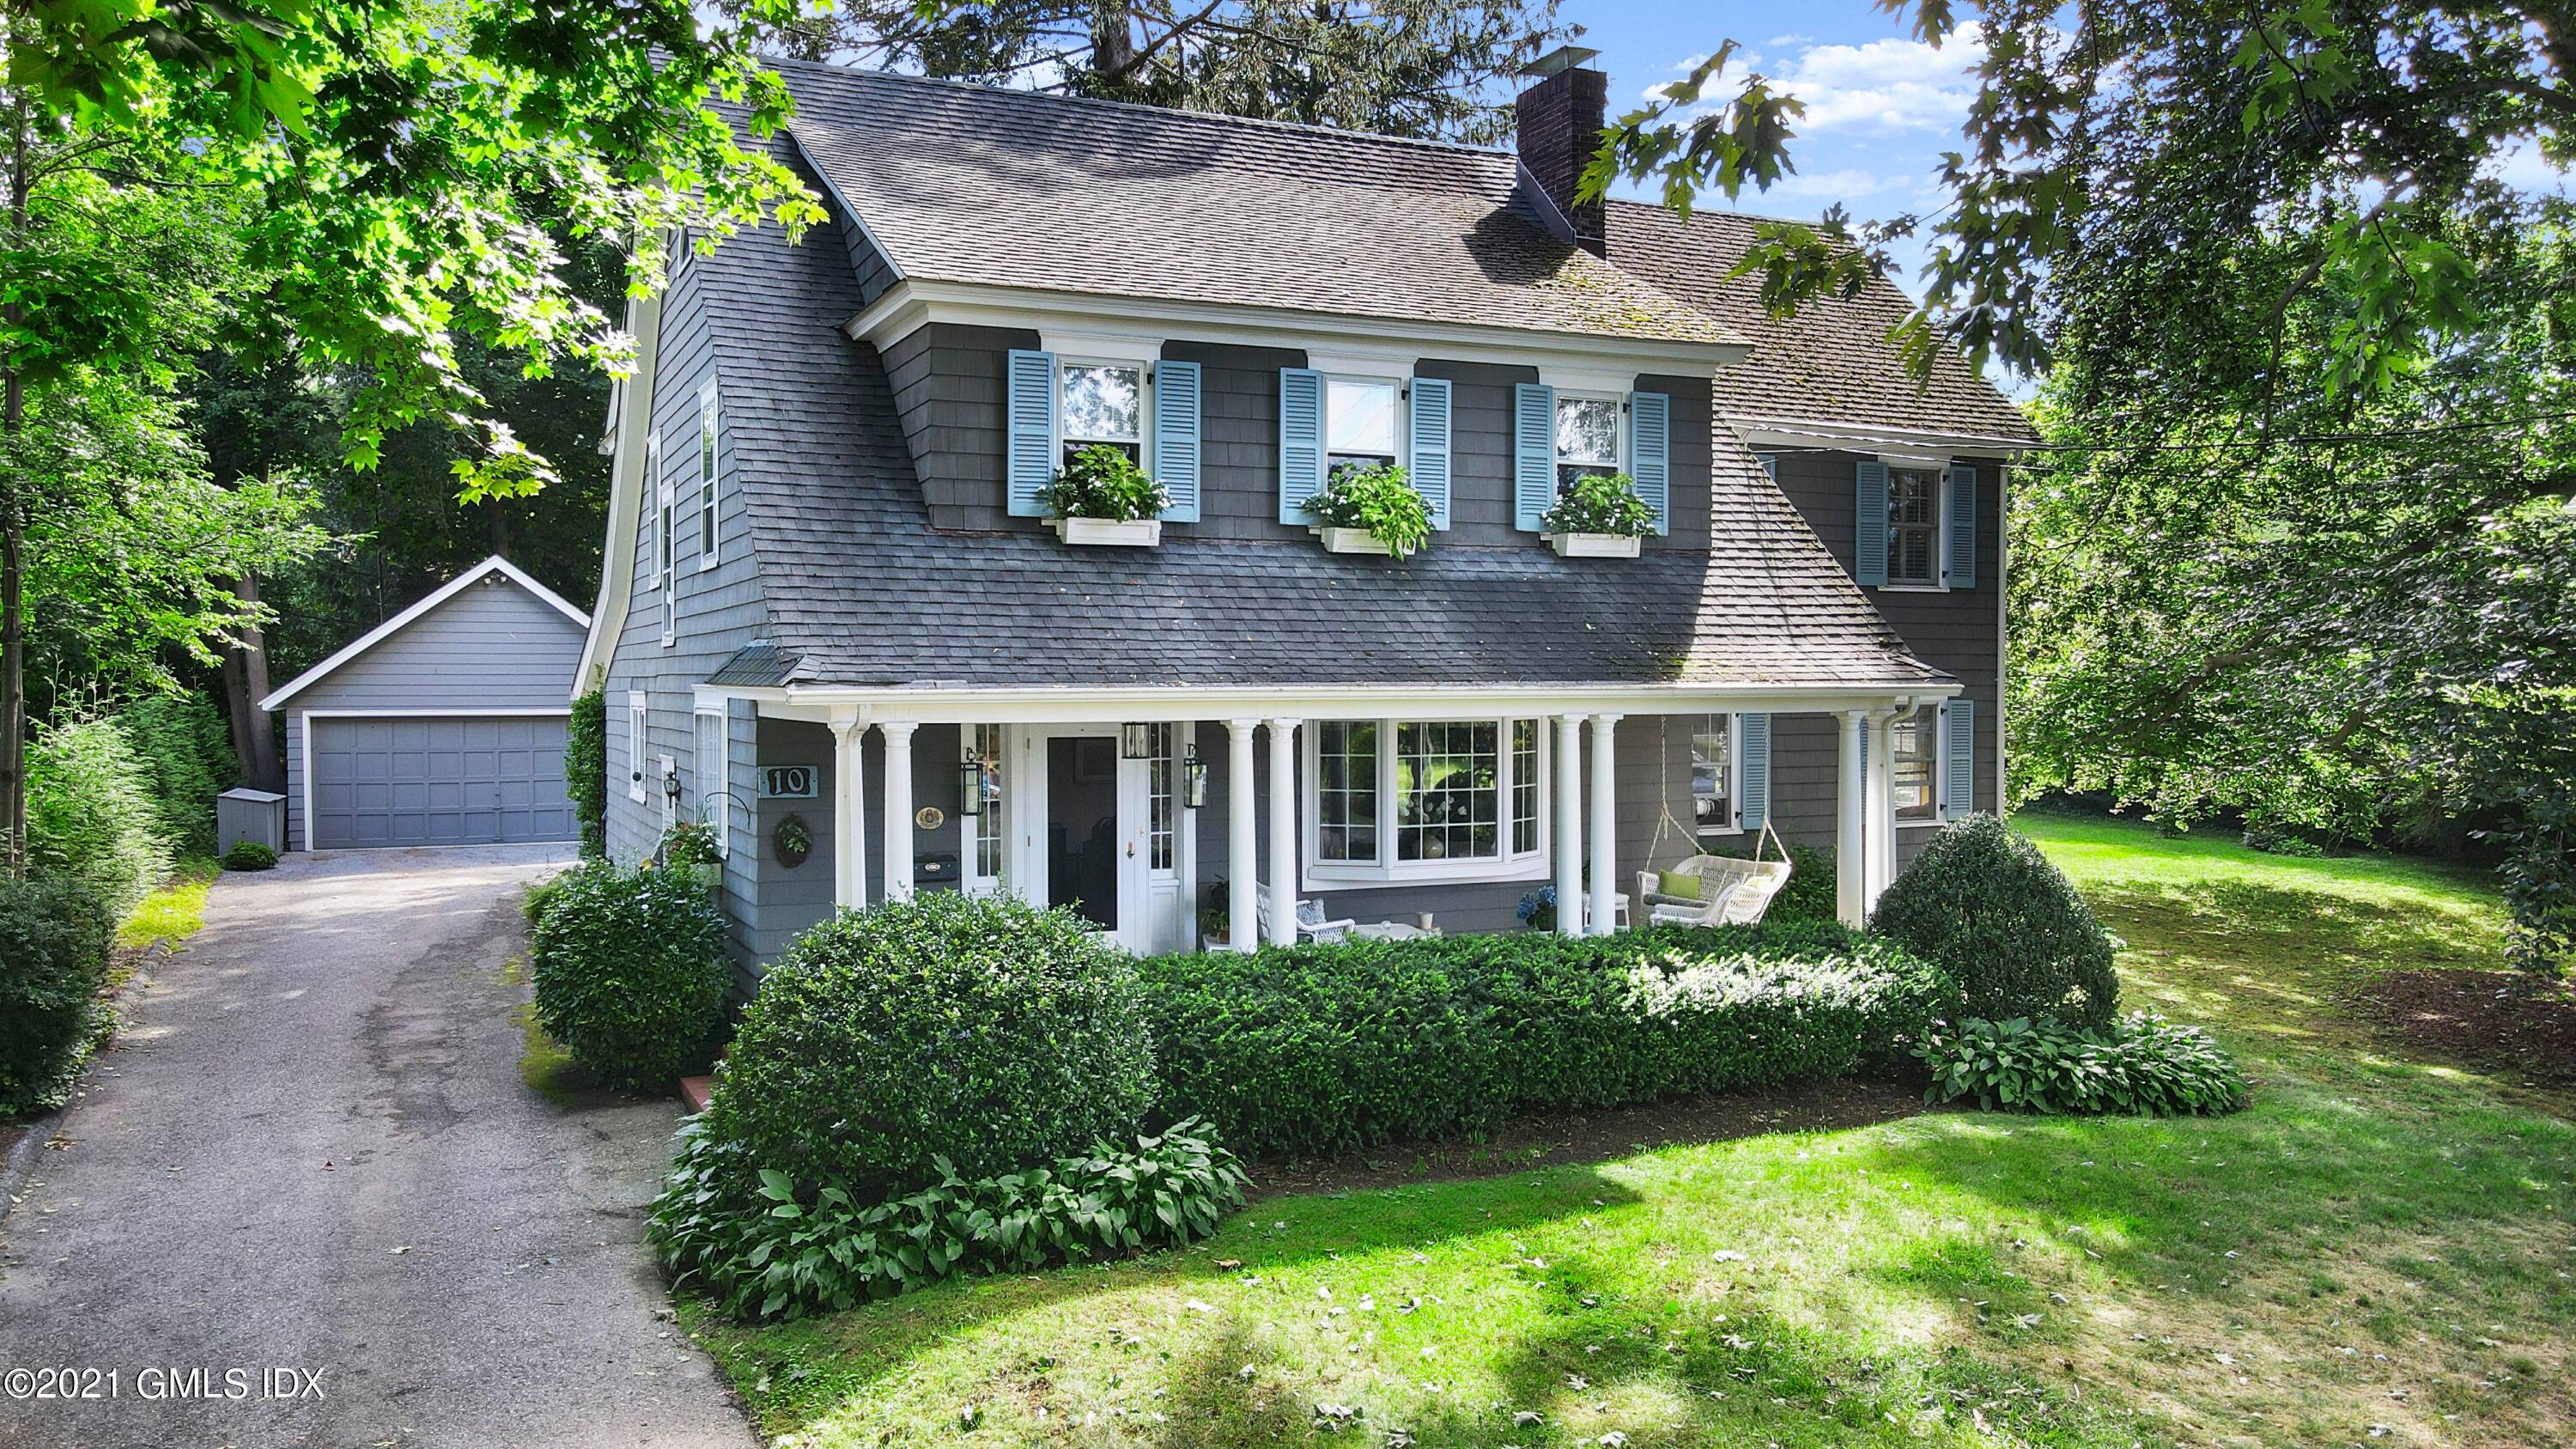 Enjoyed by the current owners for nearly 50 years, this solid five bedroom, three bath Shore Colonial on a coveted south of the village street now seeks new owners.